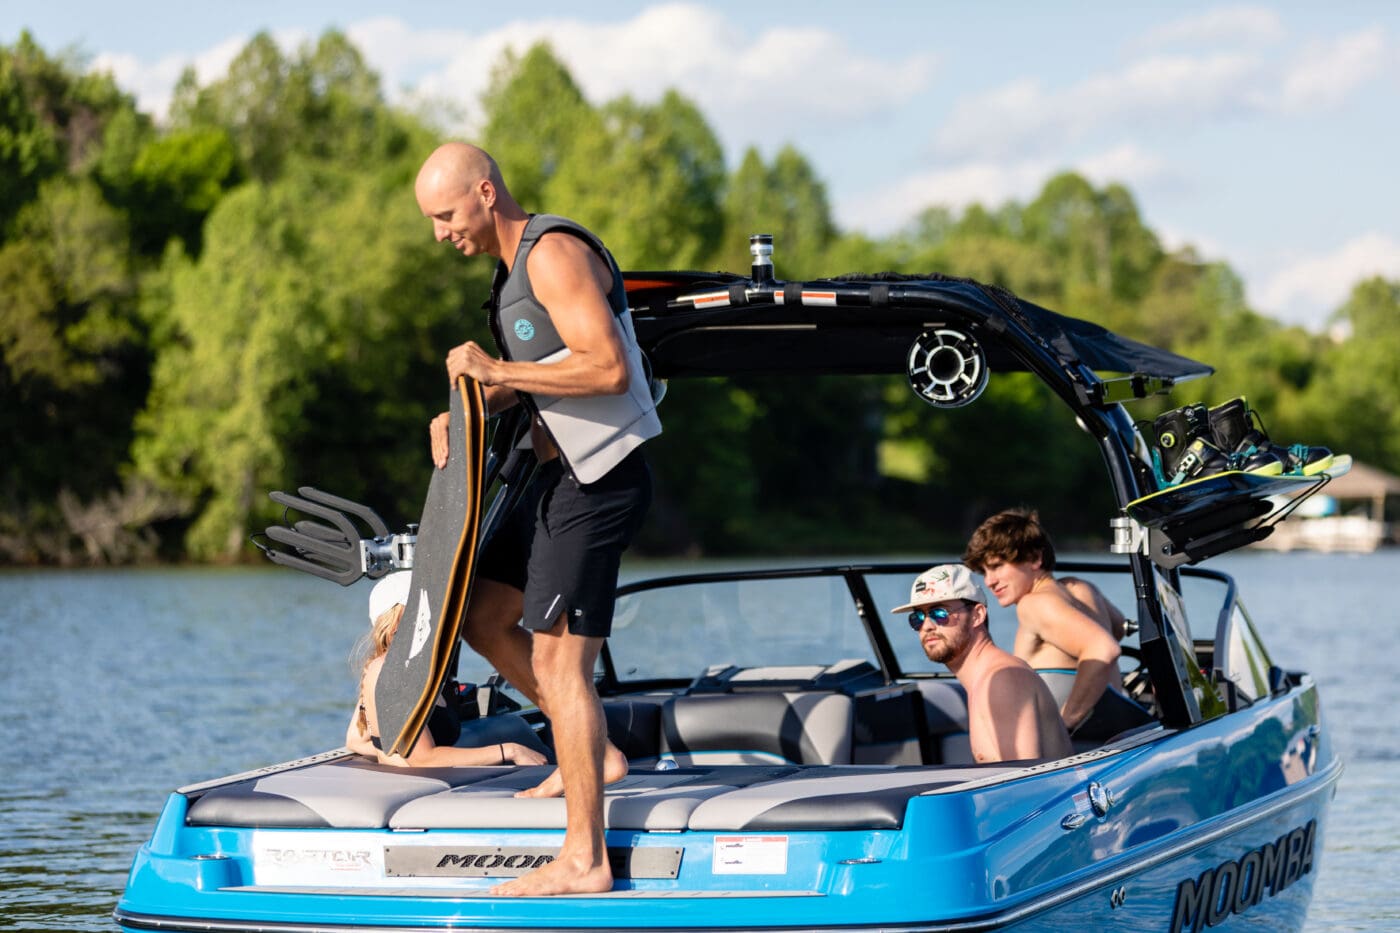 A wakeboarder gets ready to take on wakes behind a Moomba boat.